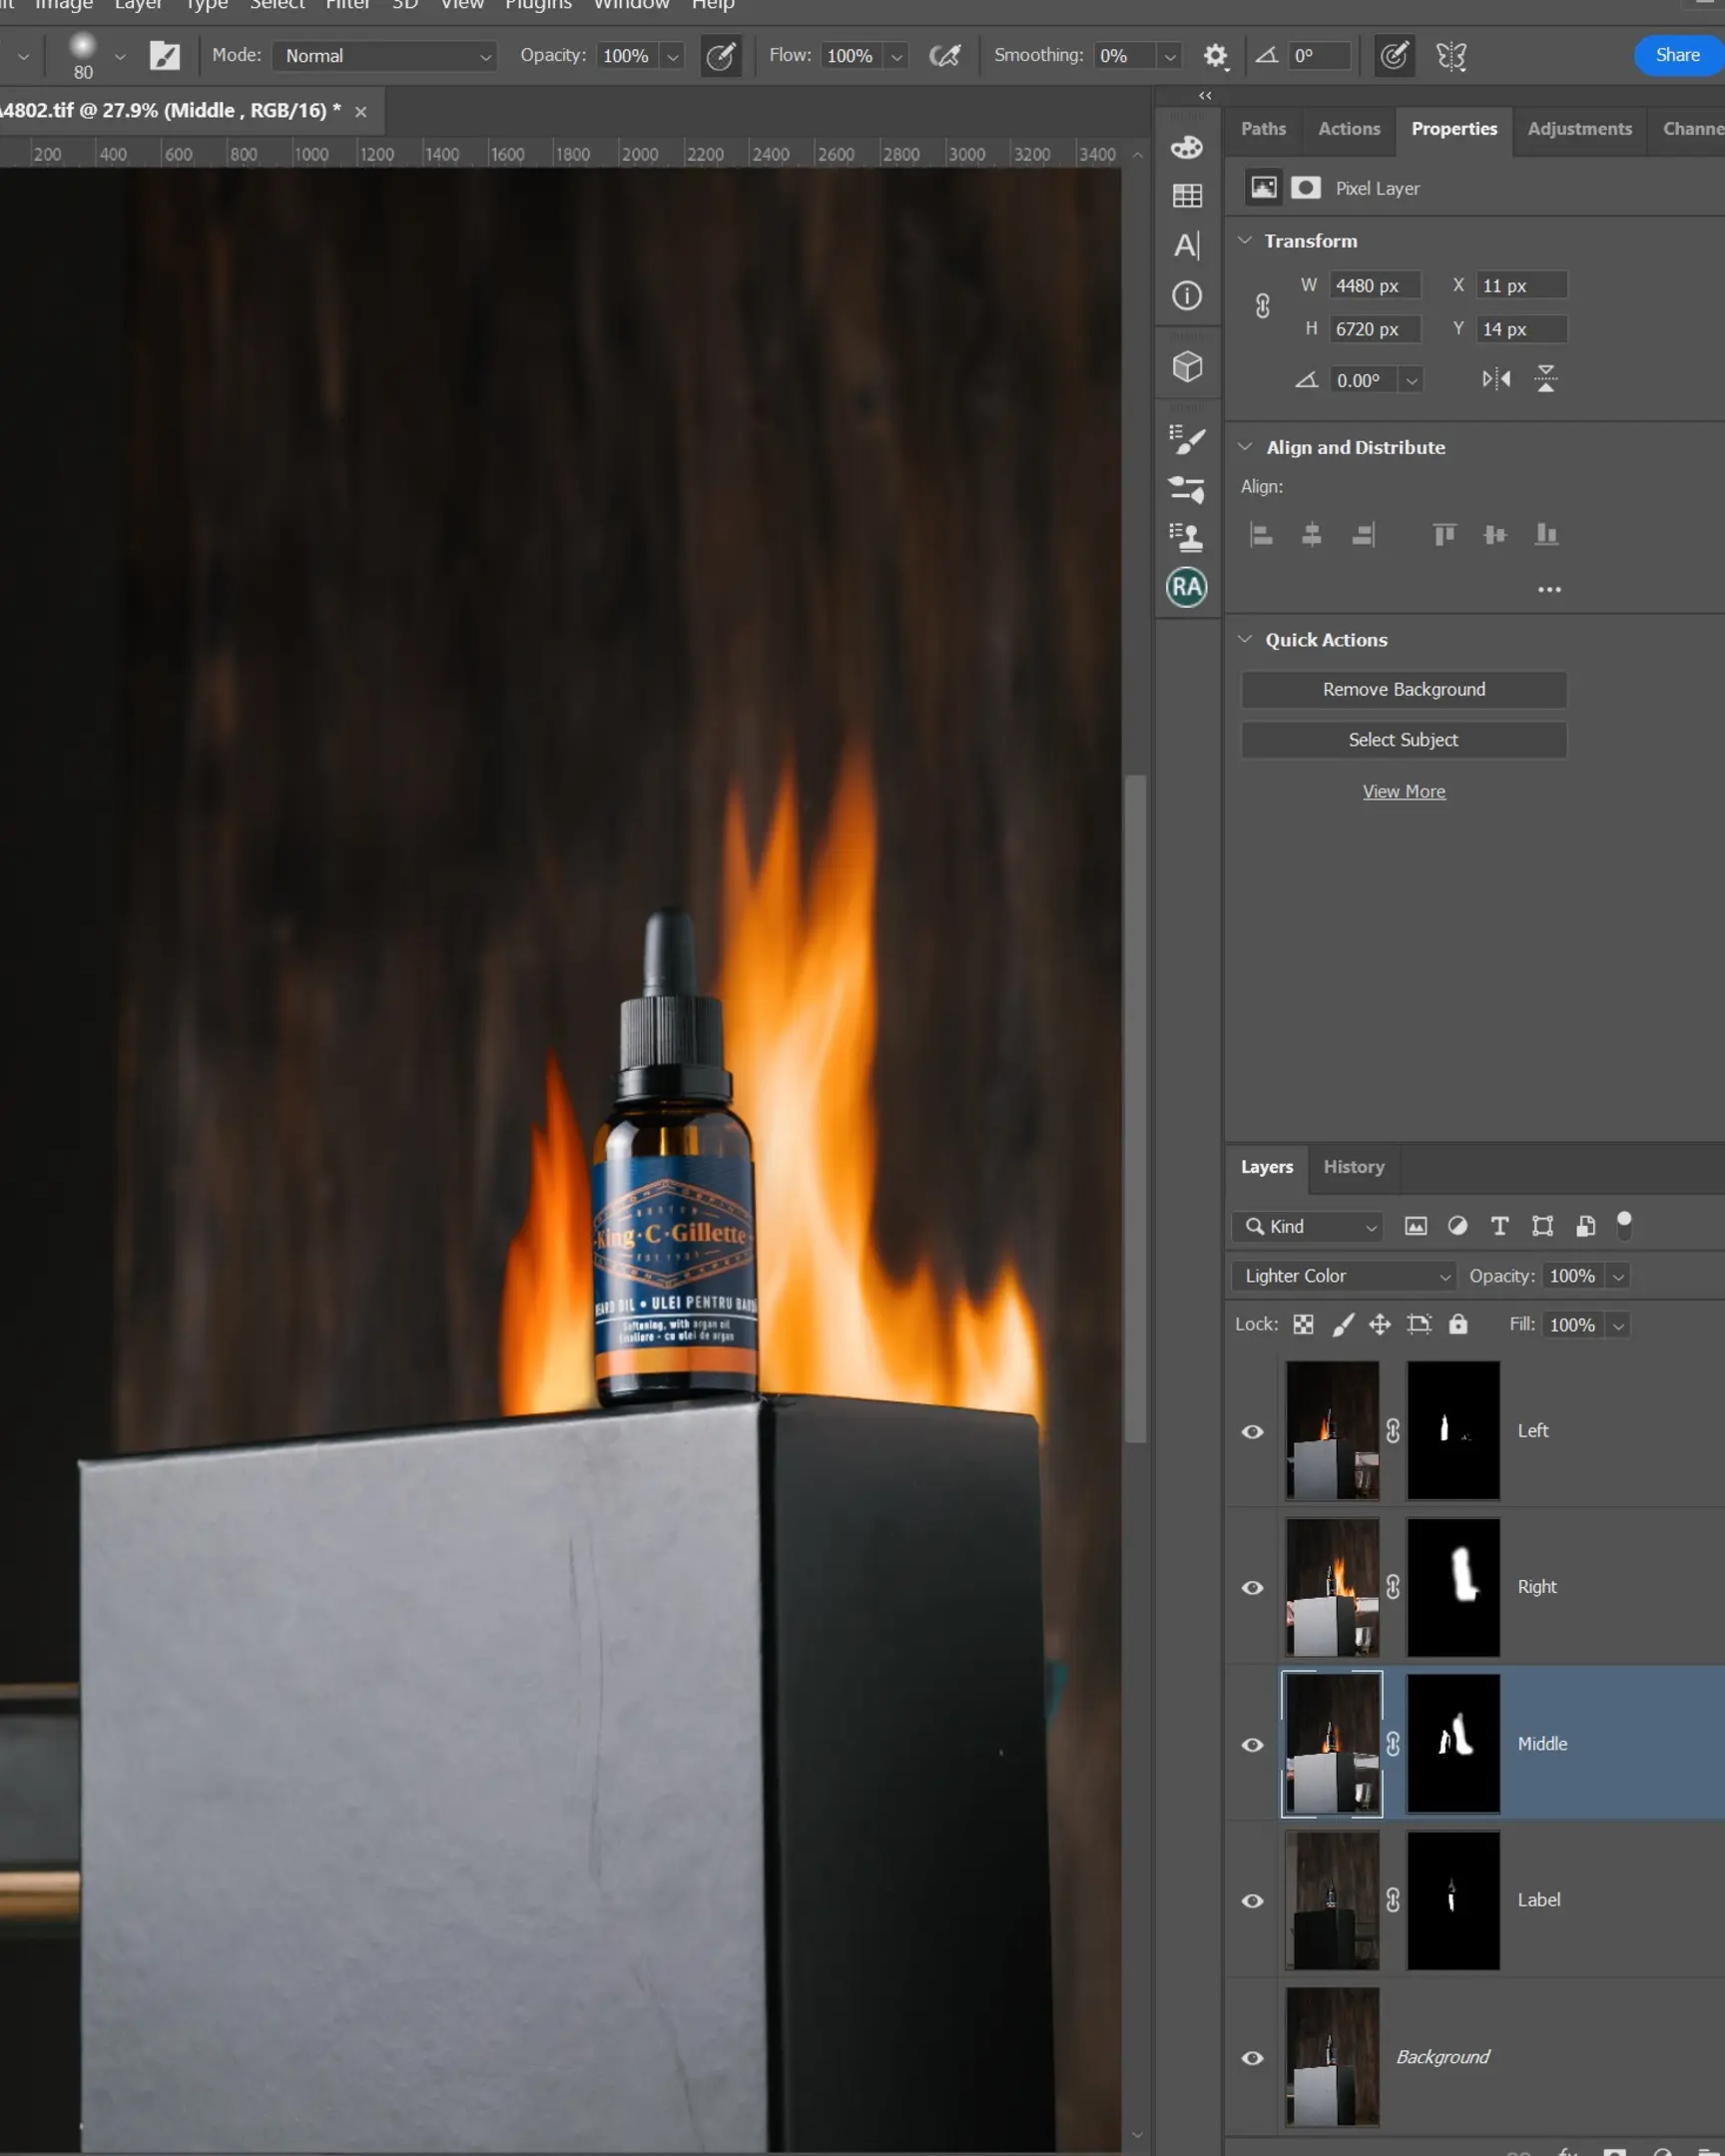 Photoshop - Layers with masks. The photo shows layers in Photoshop. On two of the layers, there is a mask, which is partially painted in white for the manifestation of fire. To attract the attention of the viewer - the masks showed.